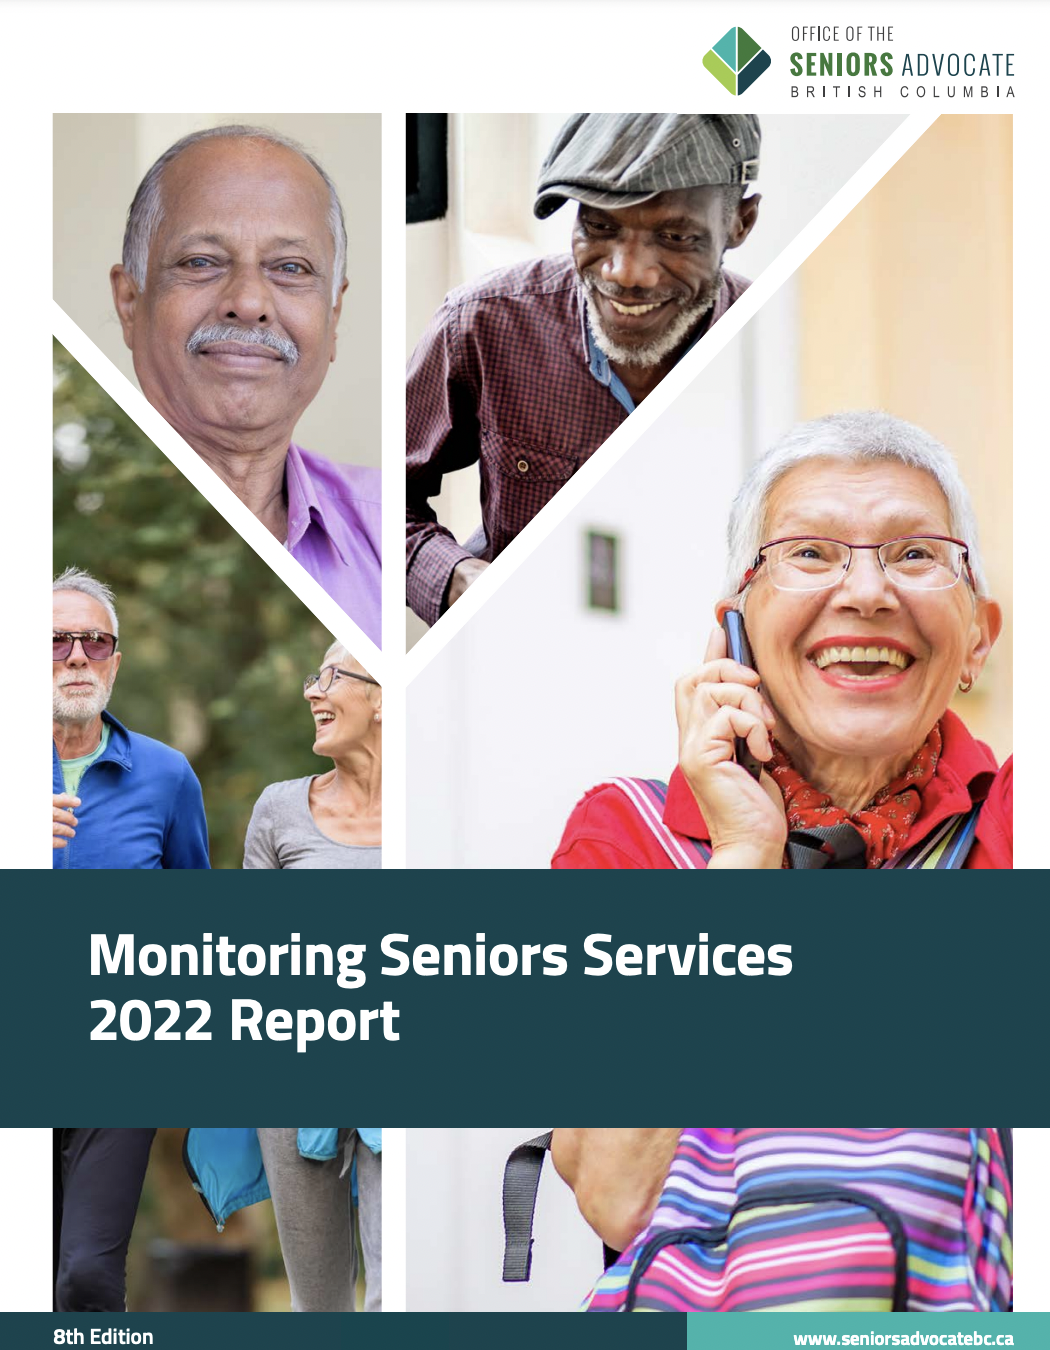 A number of senior services are struggling to meet demand